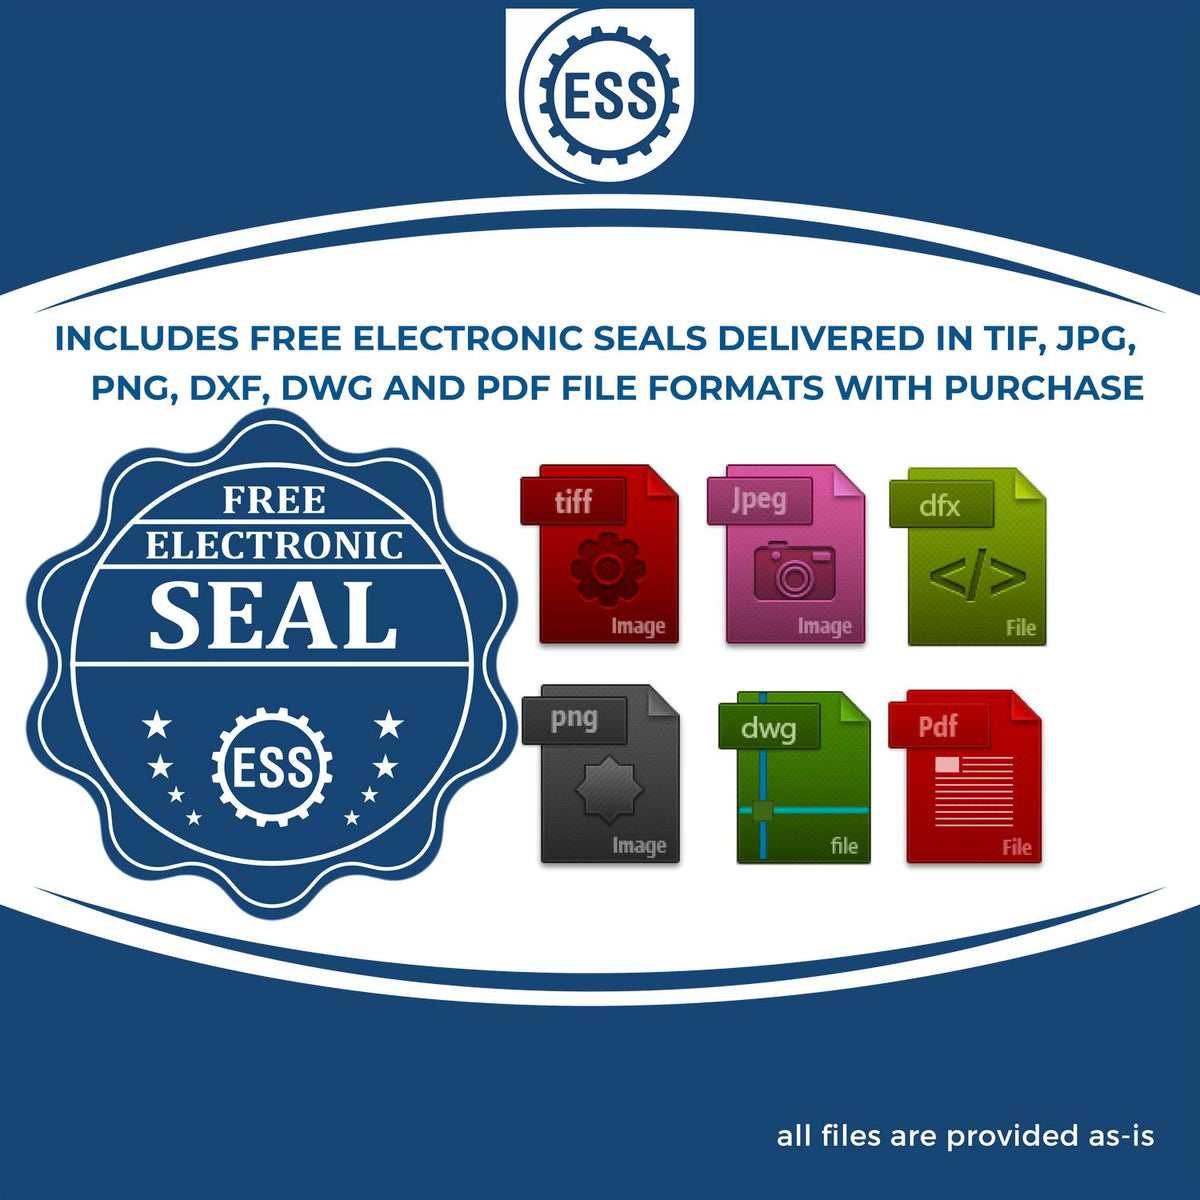 An infographic for the free electronic seal for the State of Iowa Long Reach Architectural Embossing Seal illustrating the different file type icons such as DXF, DWG, TIF, JPG and PNG.